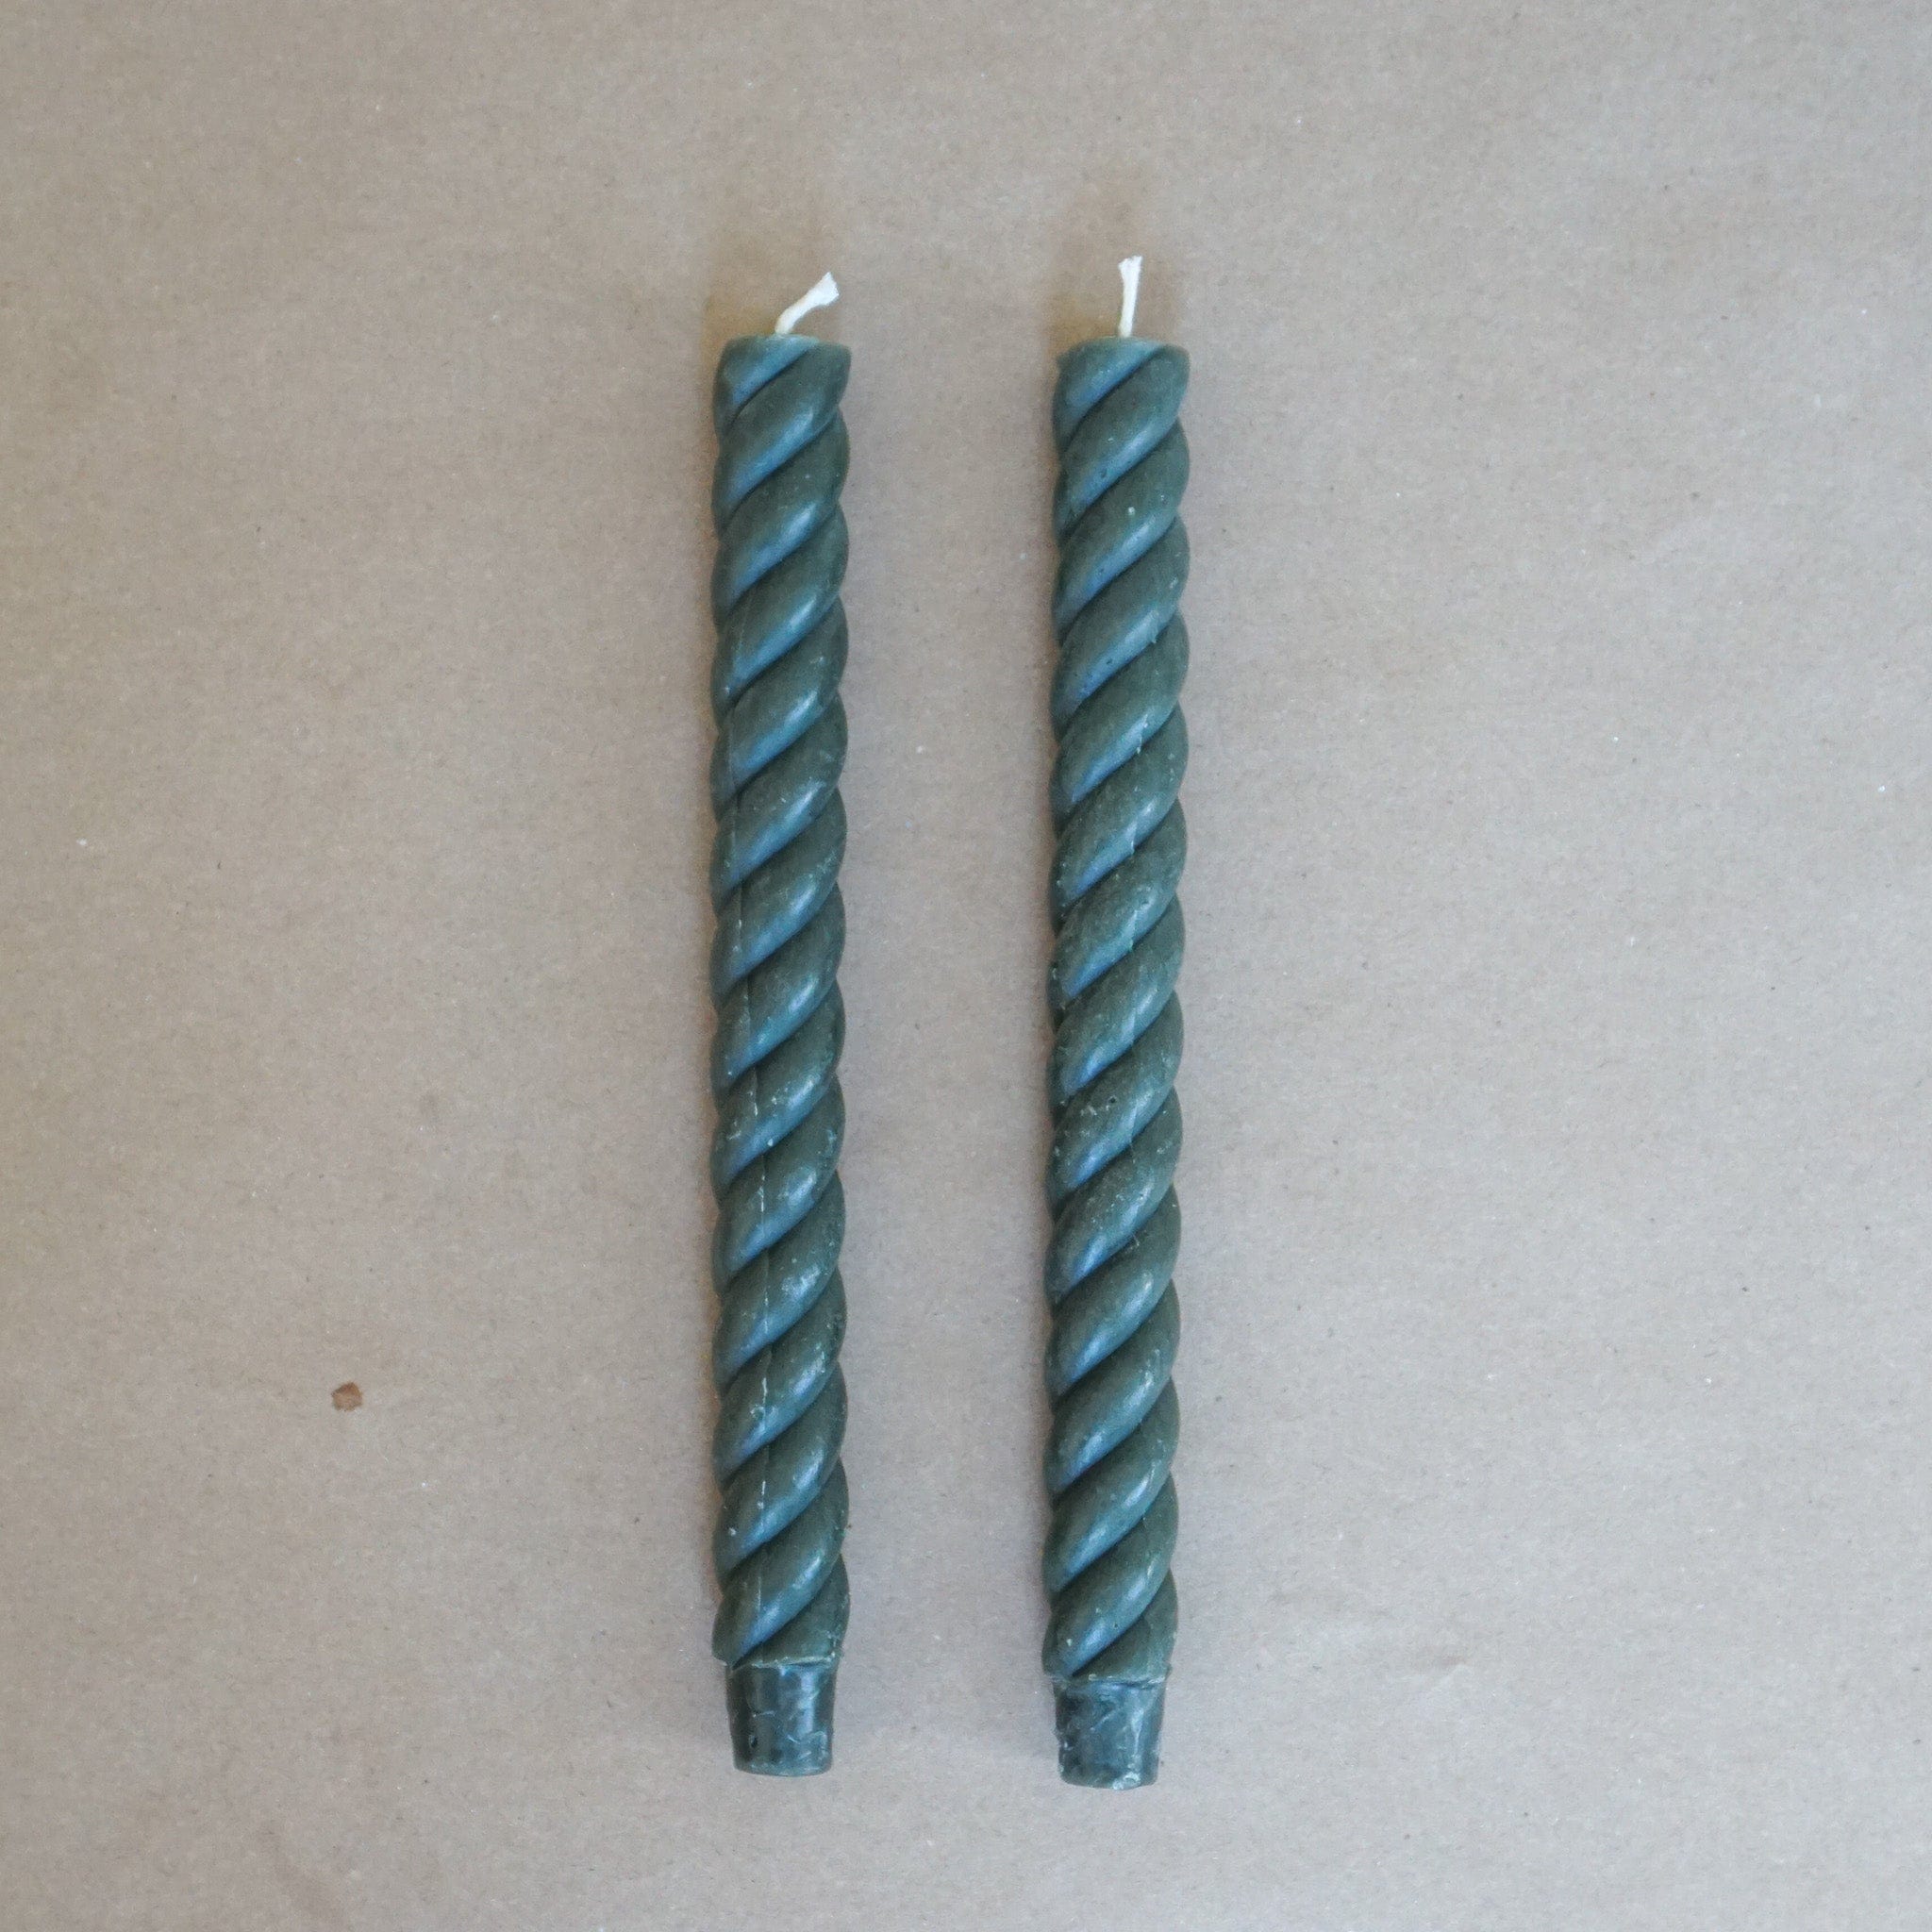 GREENTREE CANDLES Decor Rope Taper Greentree Candles - Antique